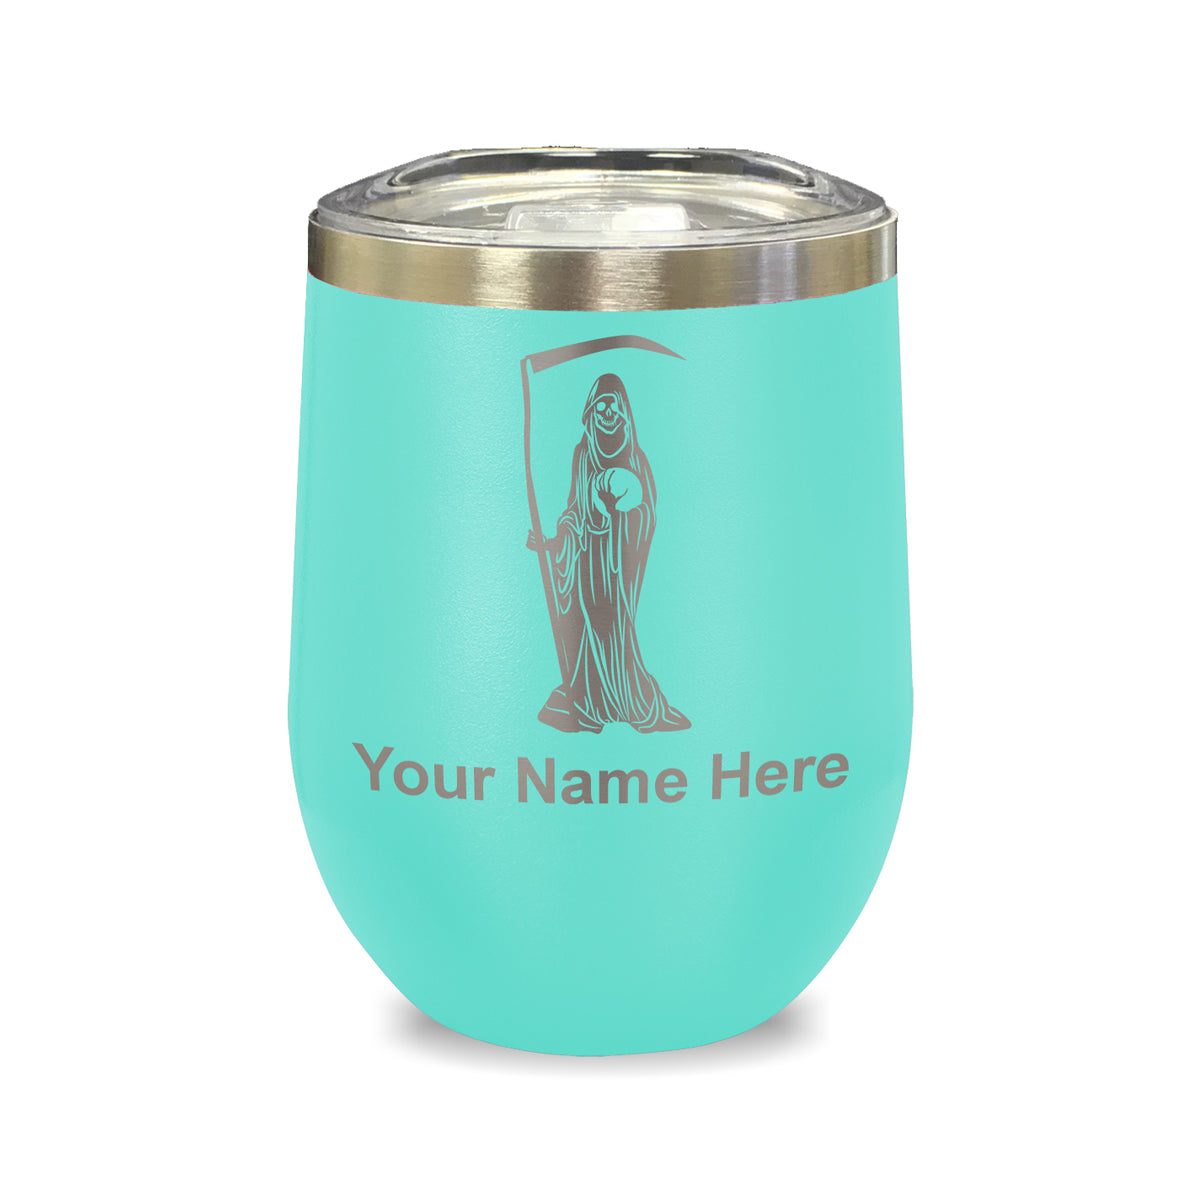 LaserGram Double Wall Stainless Steel Wine Glass, Santa Muerte, Personalized Engraving Included